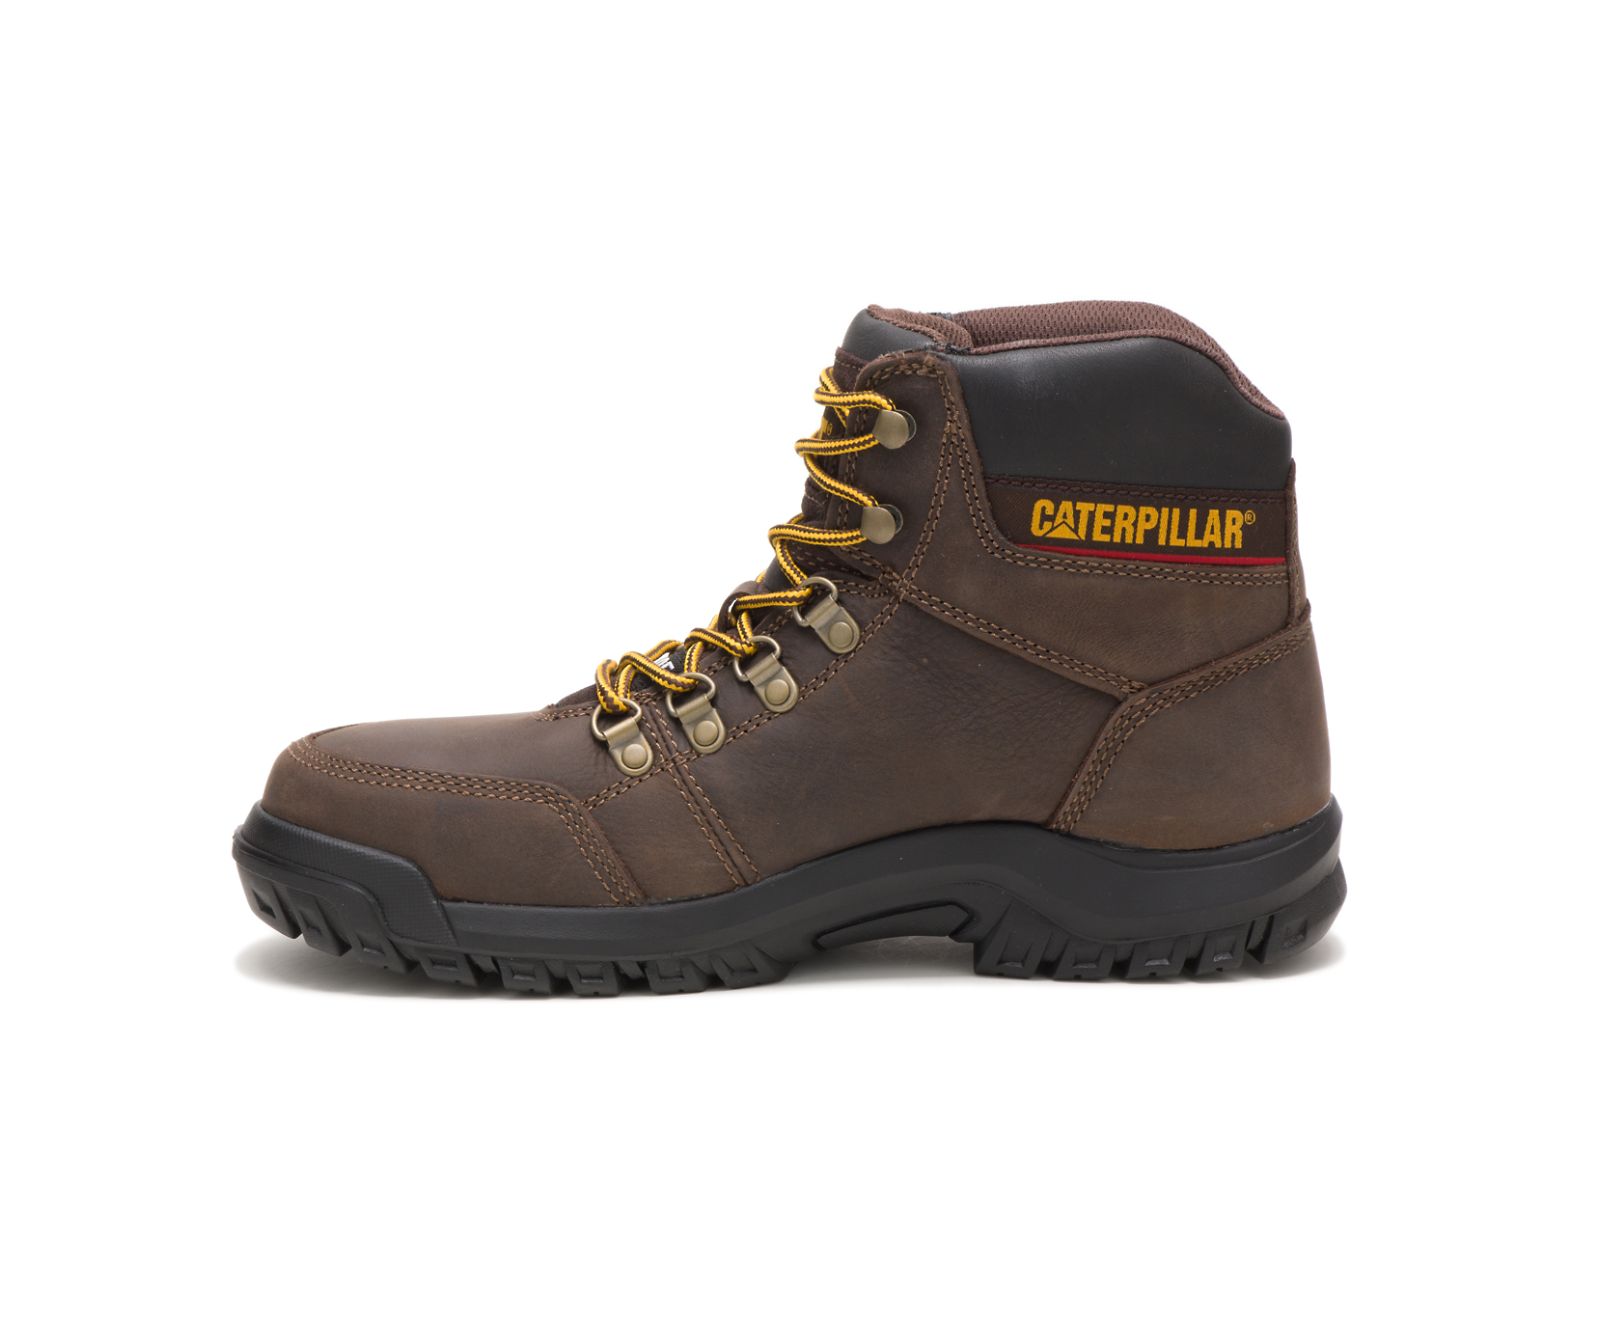 Outline Steel Toe Work Boots